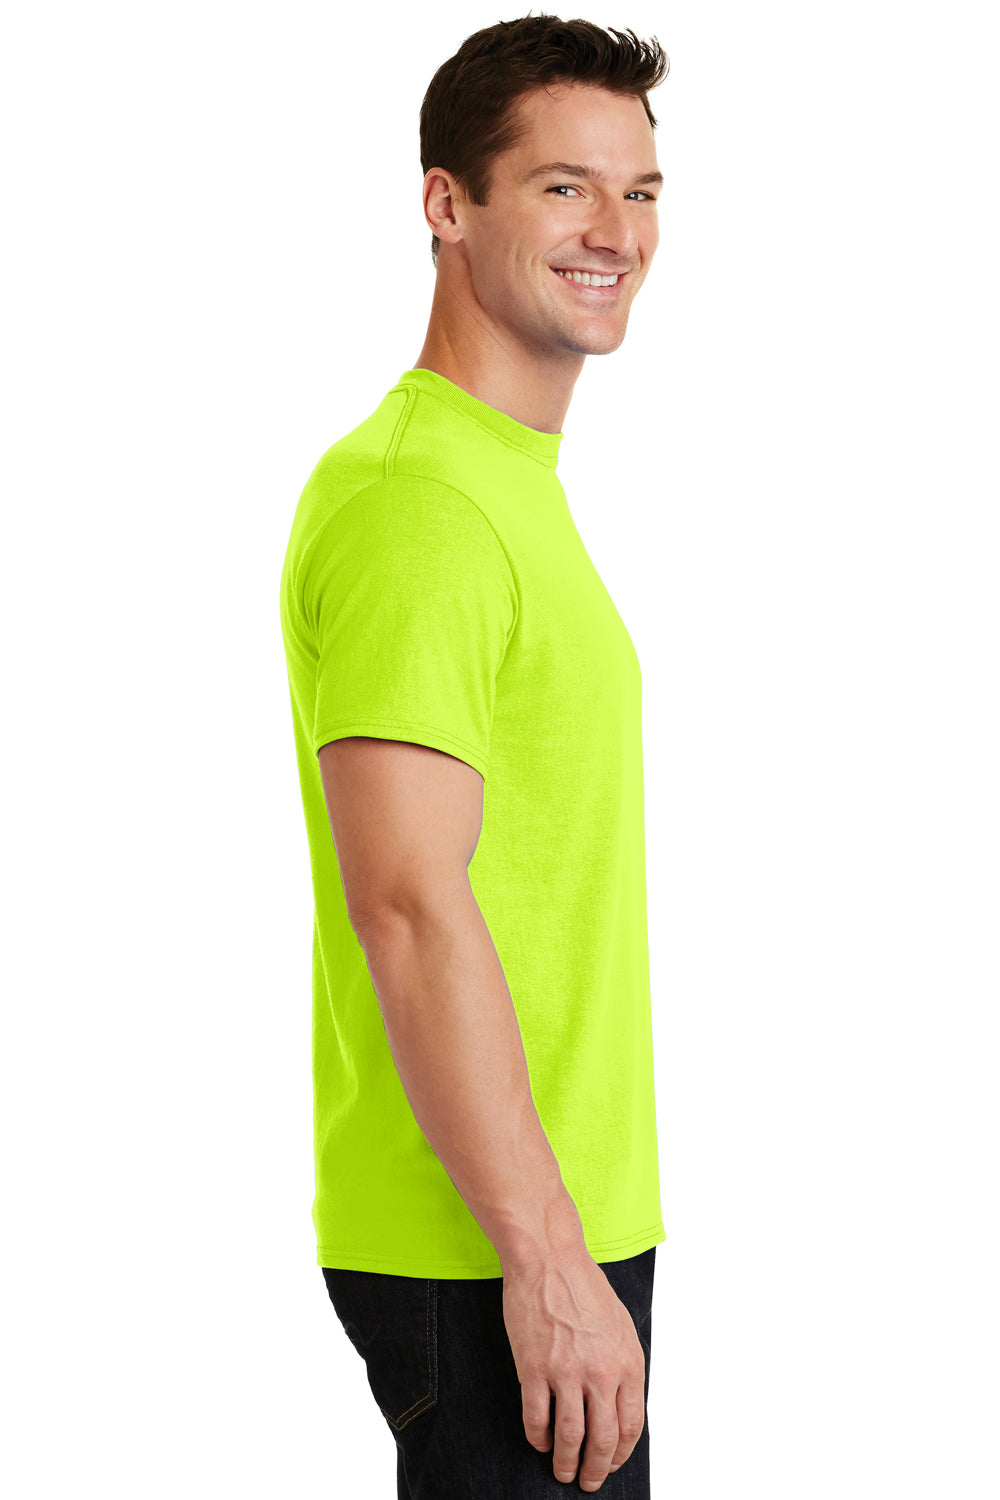 Port & Company PC55 Mens Core Short Sleeve Crewneck T-Shirt Safety Green Side